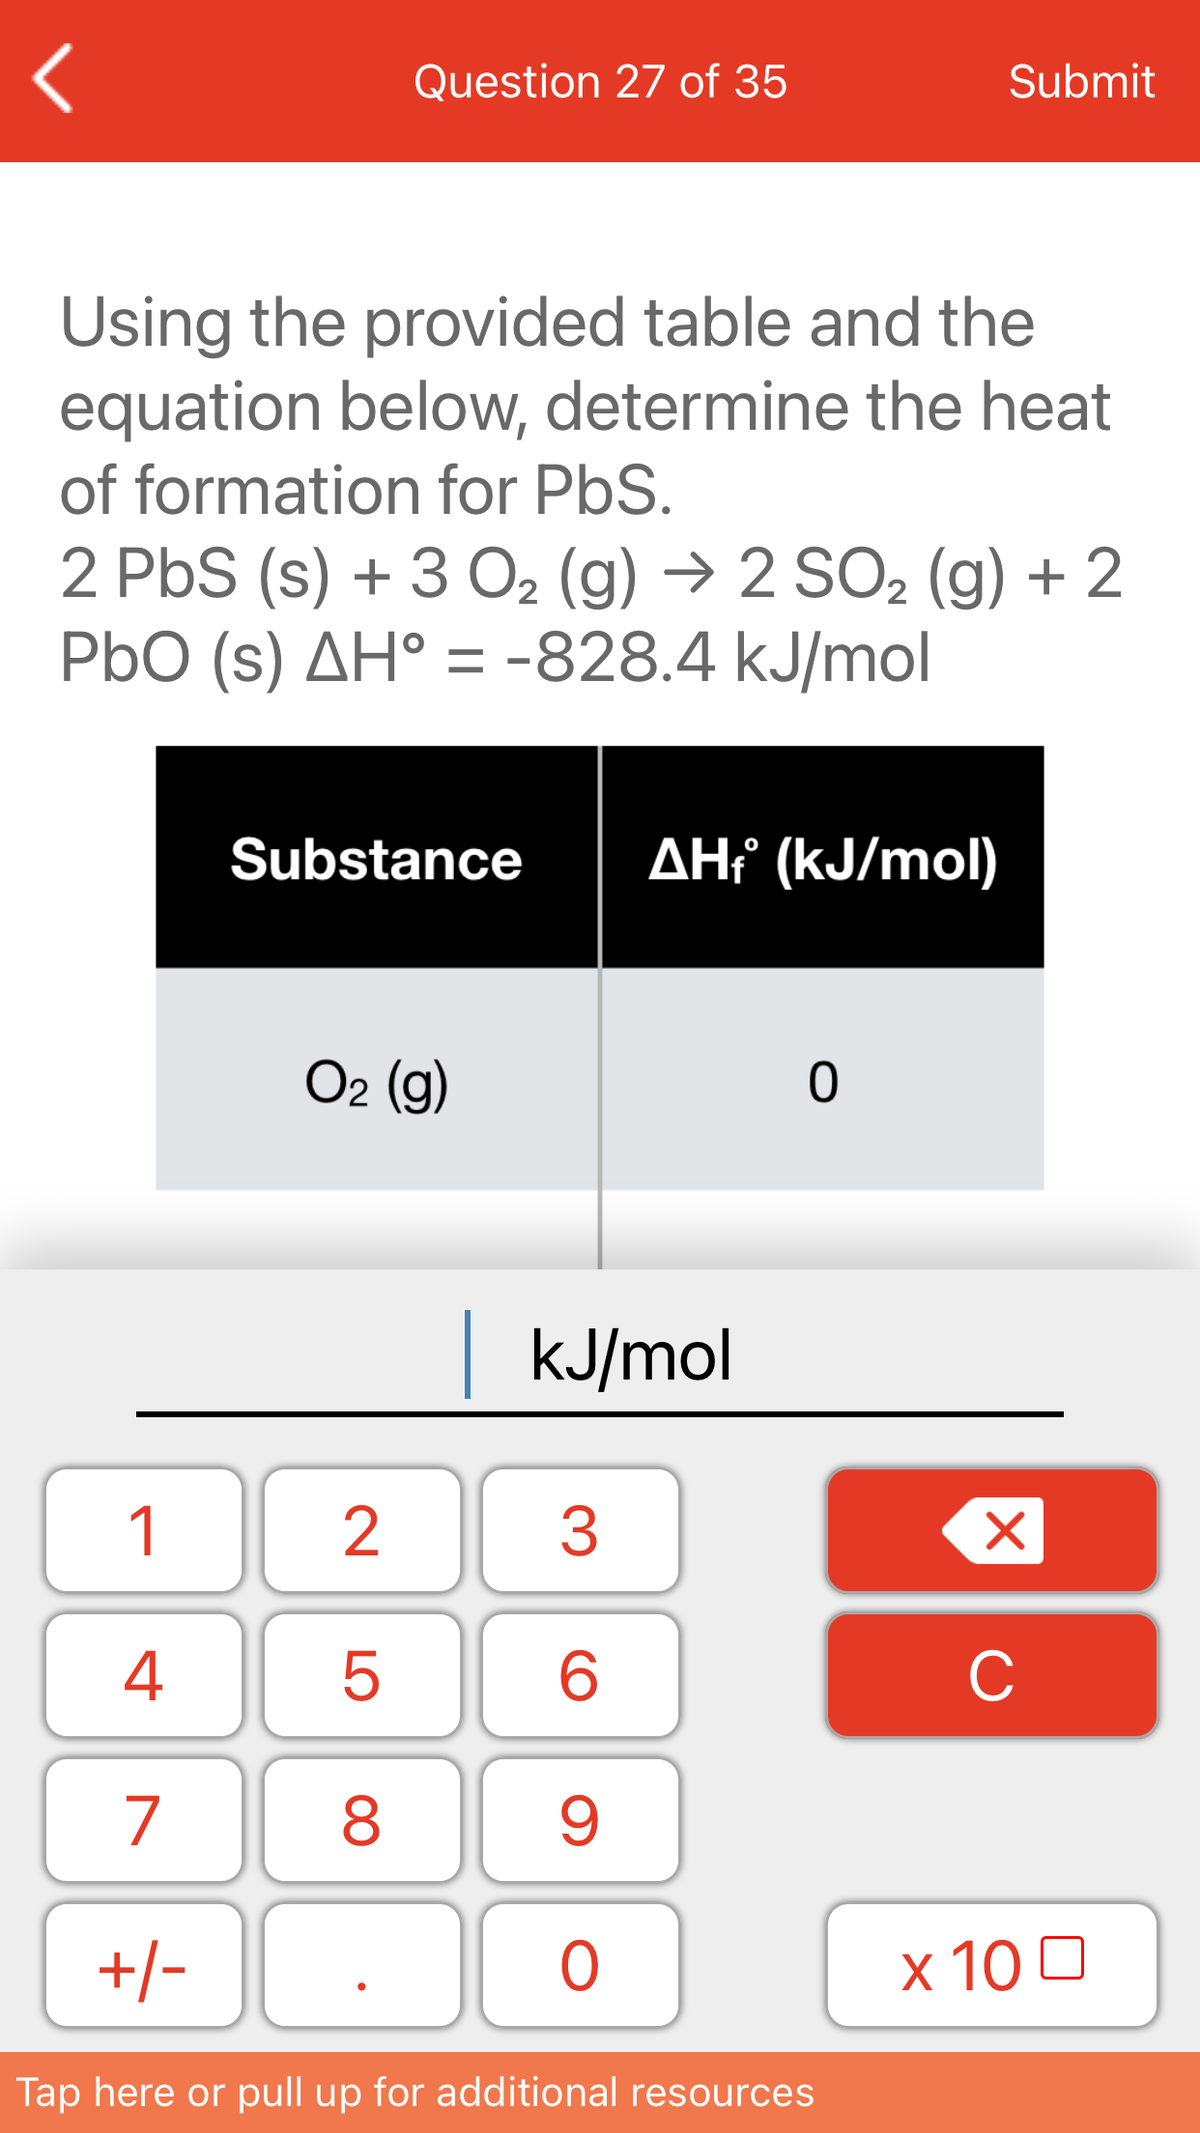 Question 27 of 35
Submit
Using the provided table and the
equation below, determine the heat
of formation for PbS.
2 PbS (s) + 3 O2 (g) → 2 SO2 (g) + 2
PbO (s) AH° = -828.4 kJ/mol
Substance
AH? (kJ/mol)
O2 (g)
kJ/mol
1
3
4
C
7
+/-
x 10 0
Tap here or pull up for additional resources
LO
00
